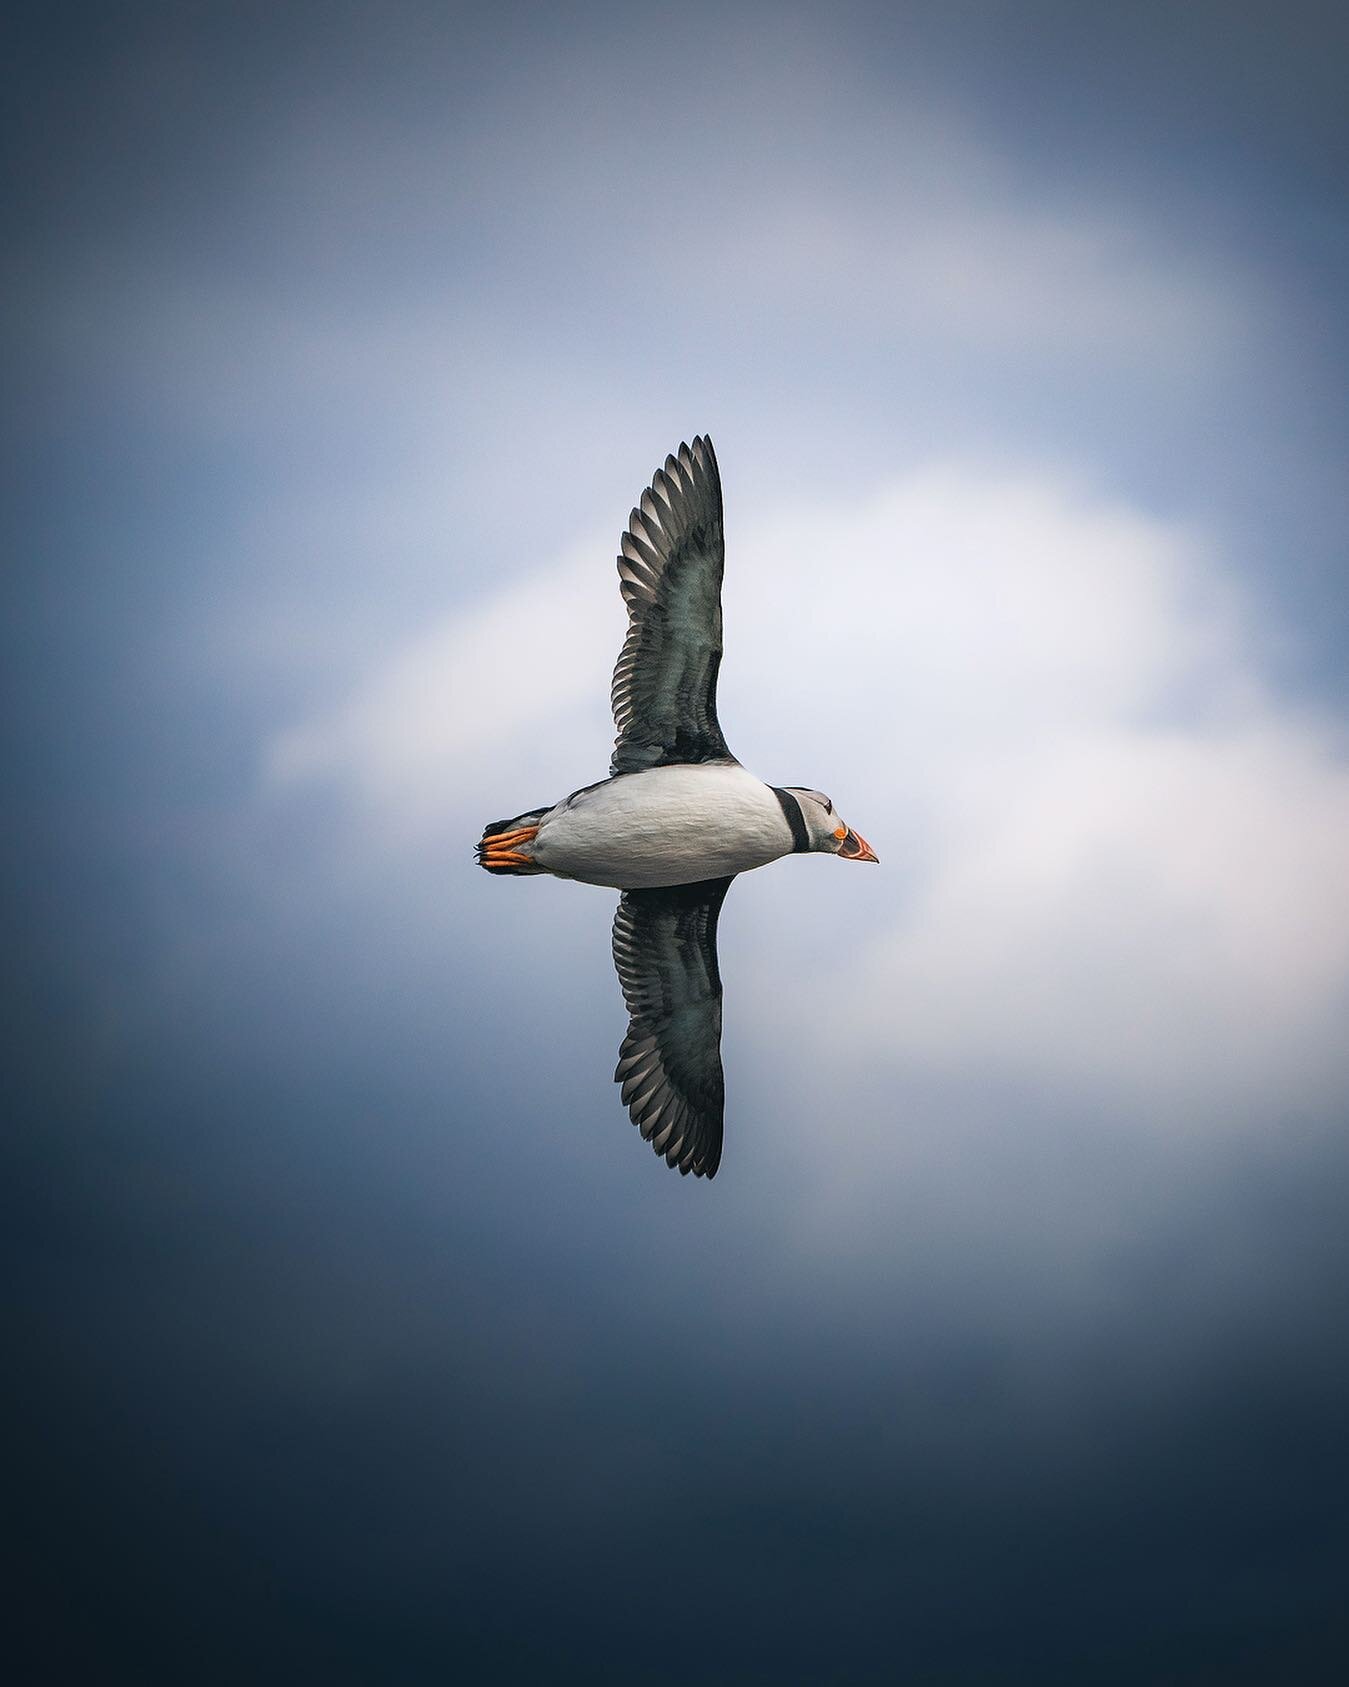 This is how we fly (Part l)

First of a little mini series of puffins in flight. This particular bird looks graceful and elegant, but if you&rsquo;ve ever seen a puffin fly you&rsquo;ll know they actually sort of hang in the air in much the same way 